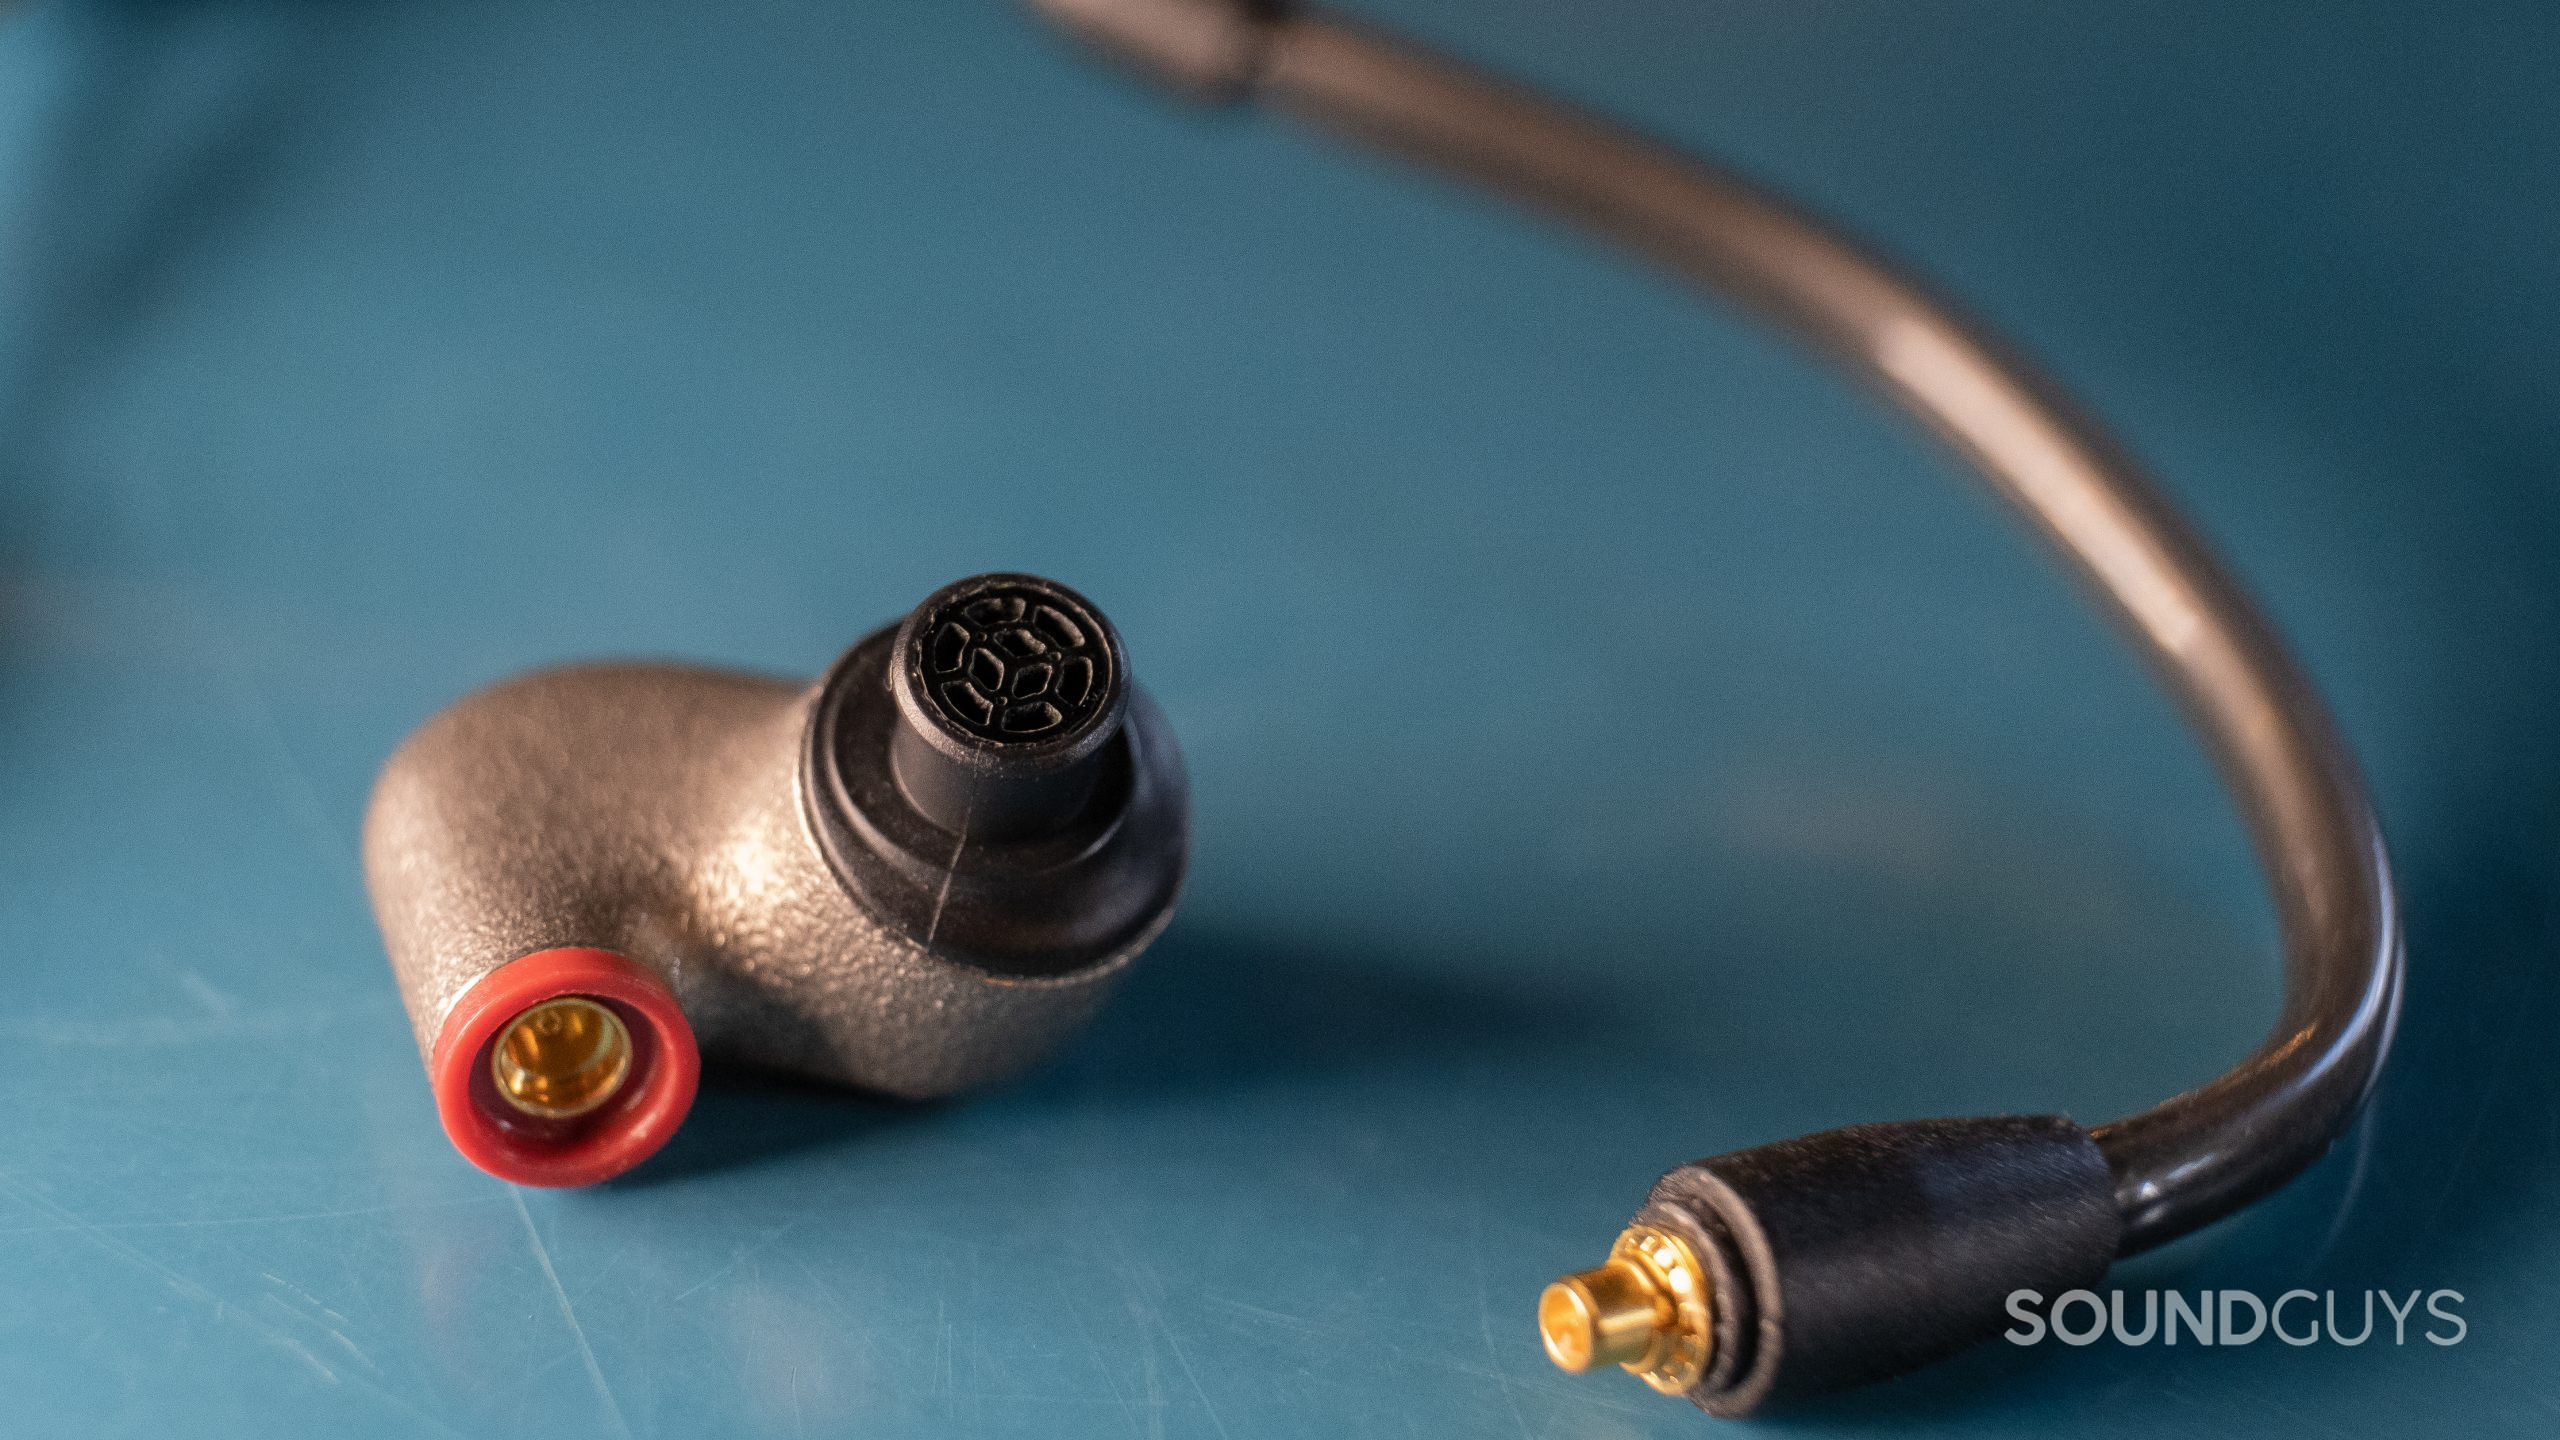 A close up shows the Sennheiser IE 600 MMCX connection.